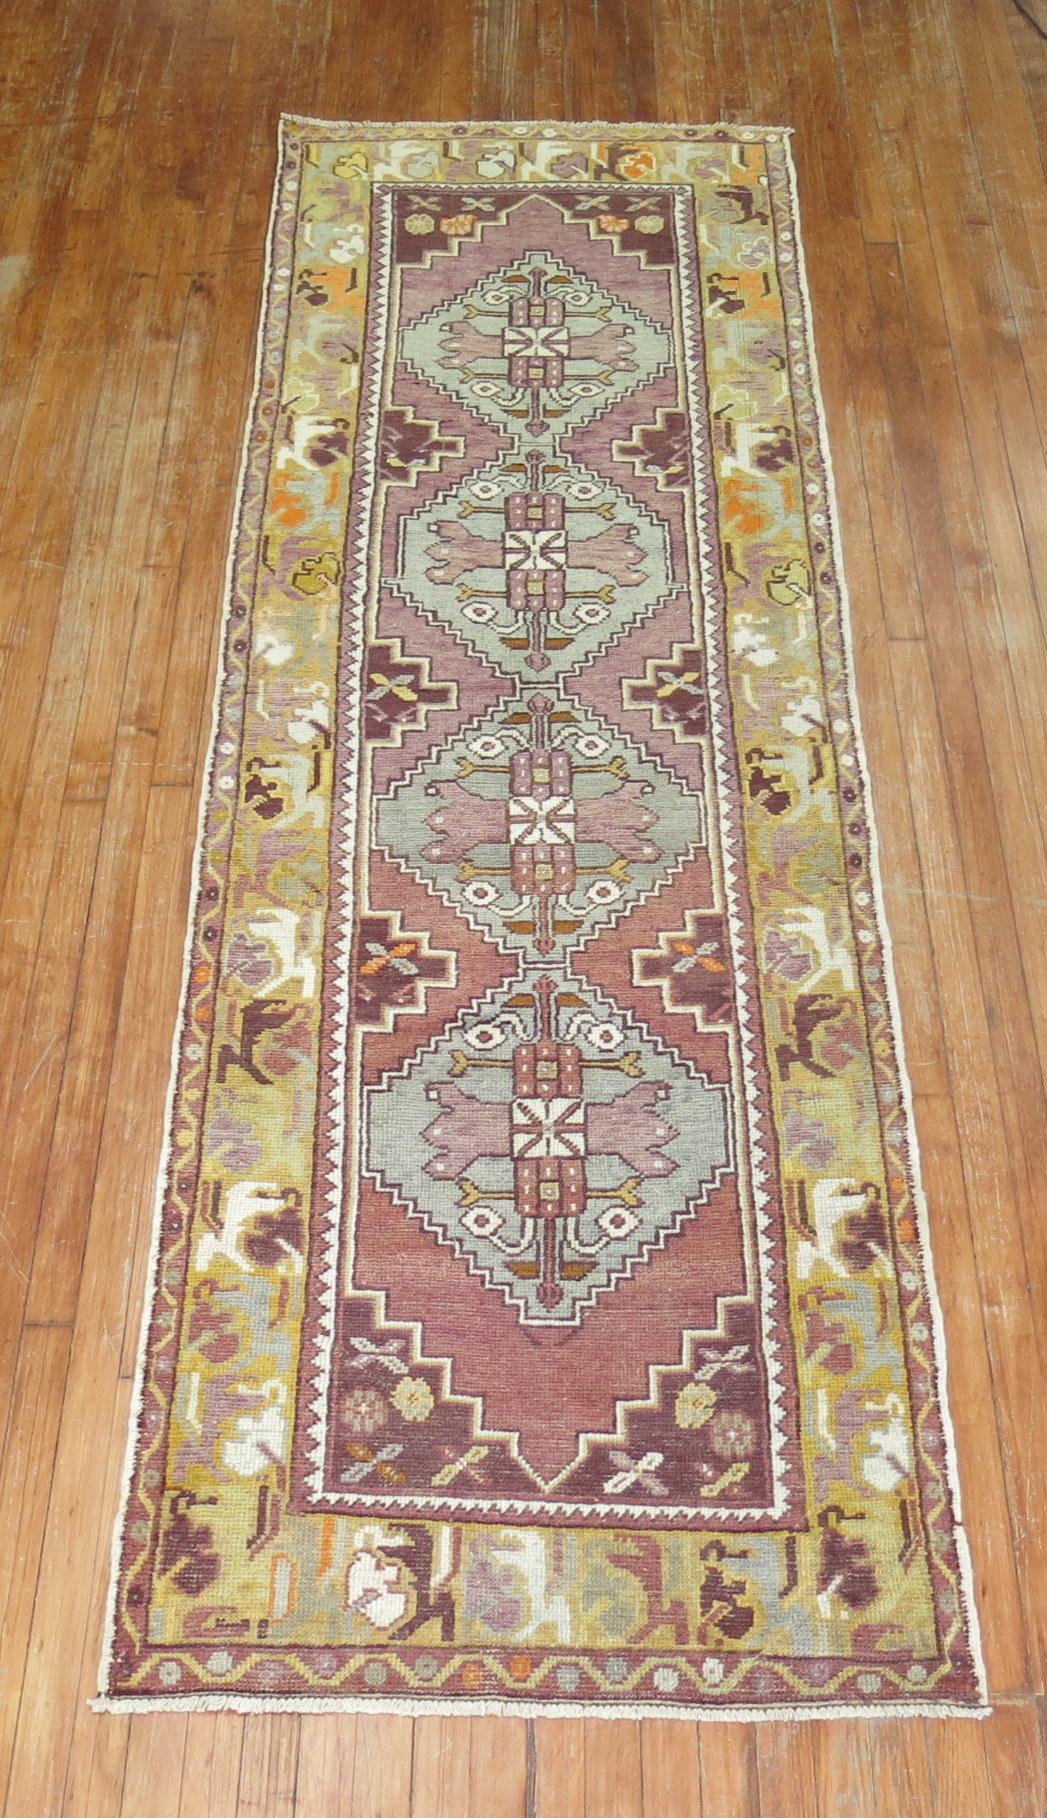 Mid-20th century wool Turkish runner with a geometric design on a purple field. The 4 medallions are gray

Measures: 3'x 9'8